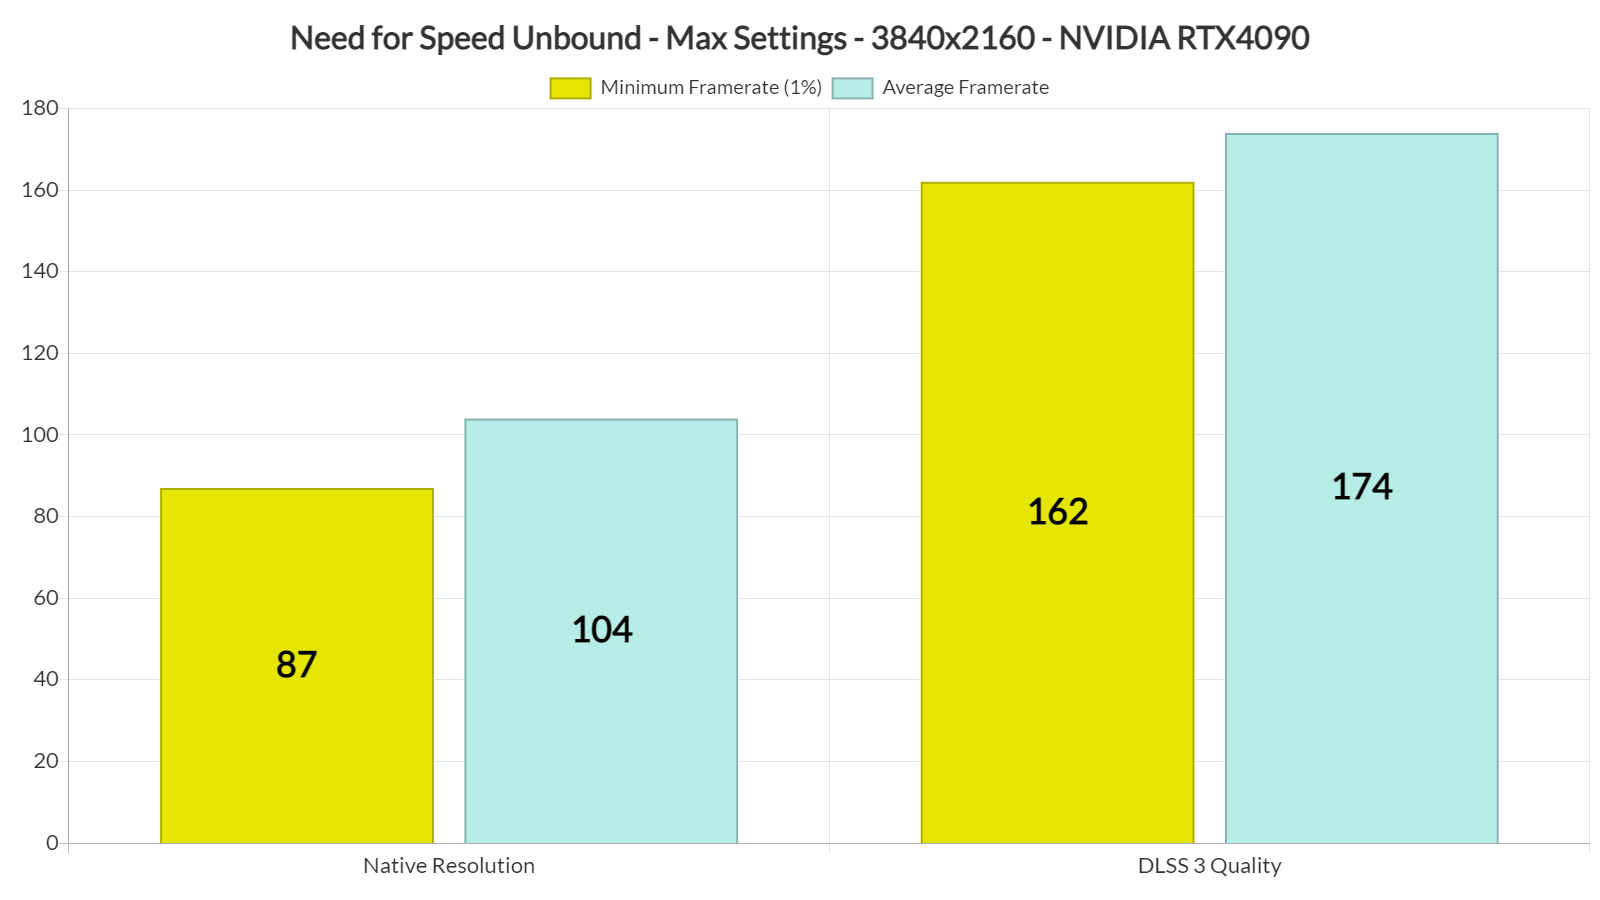 Need for Speed Unbound DLSS 3 benchmarks